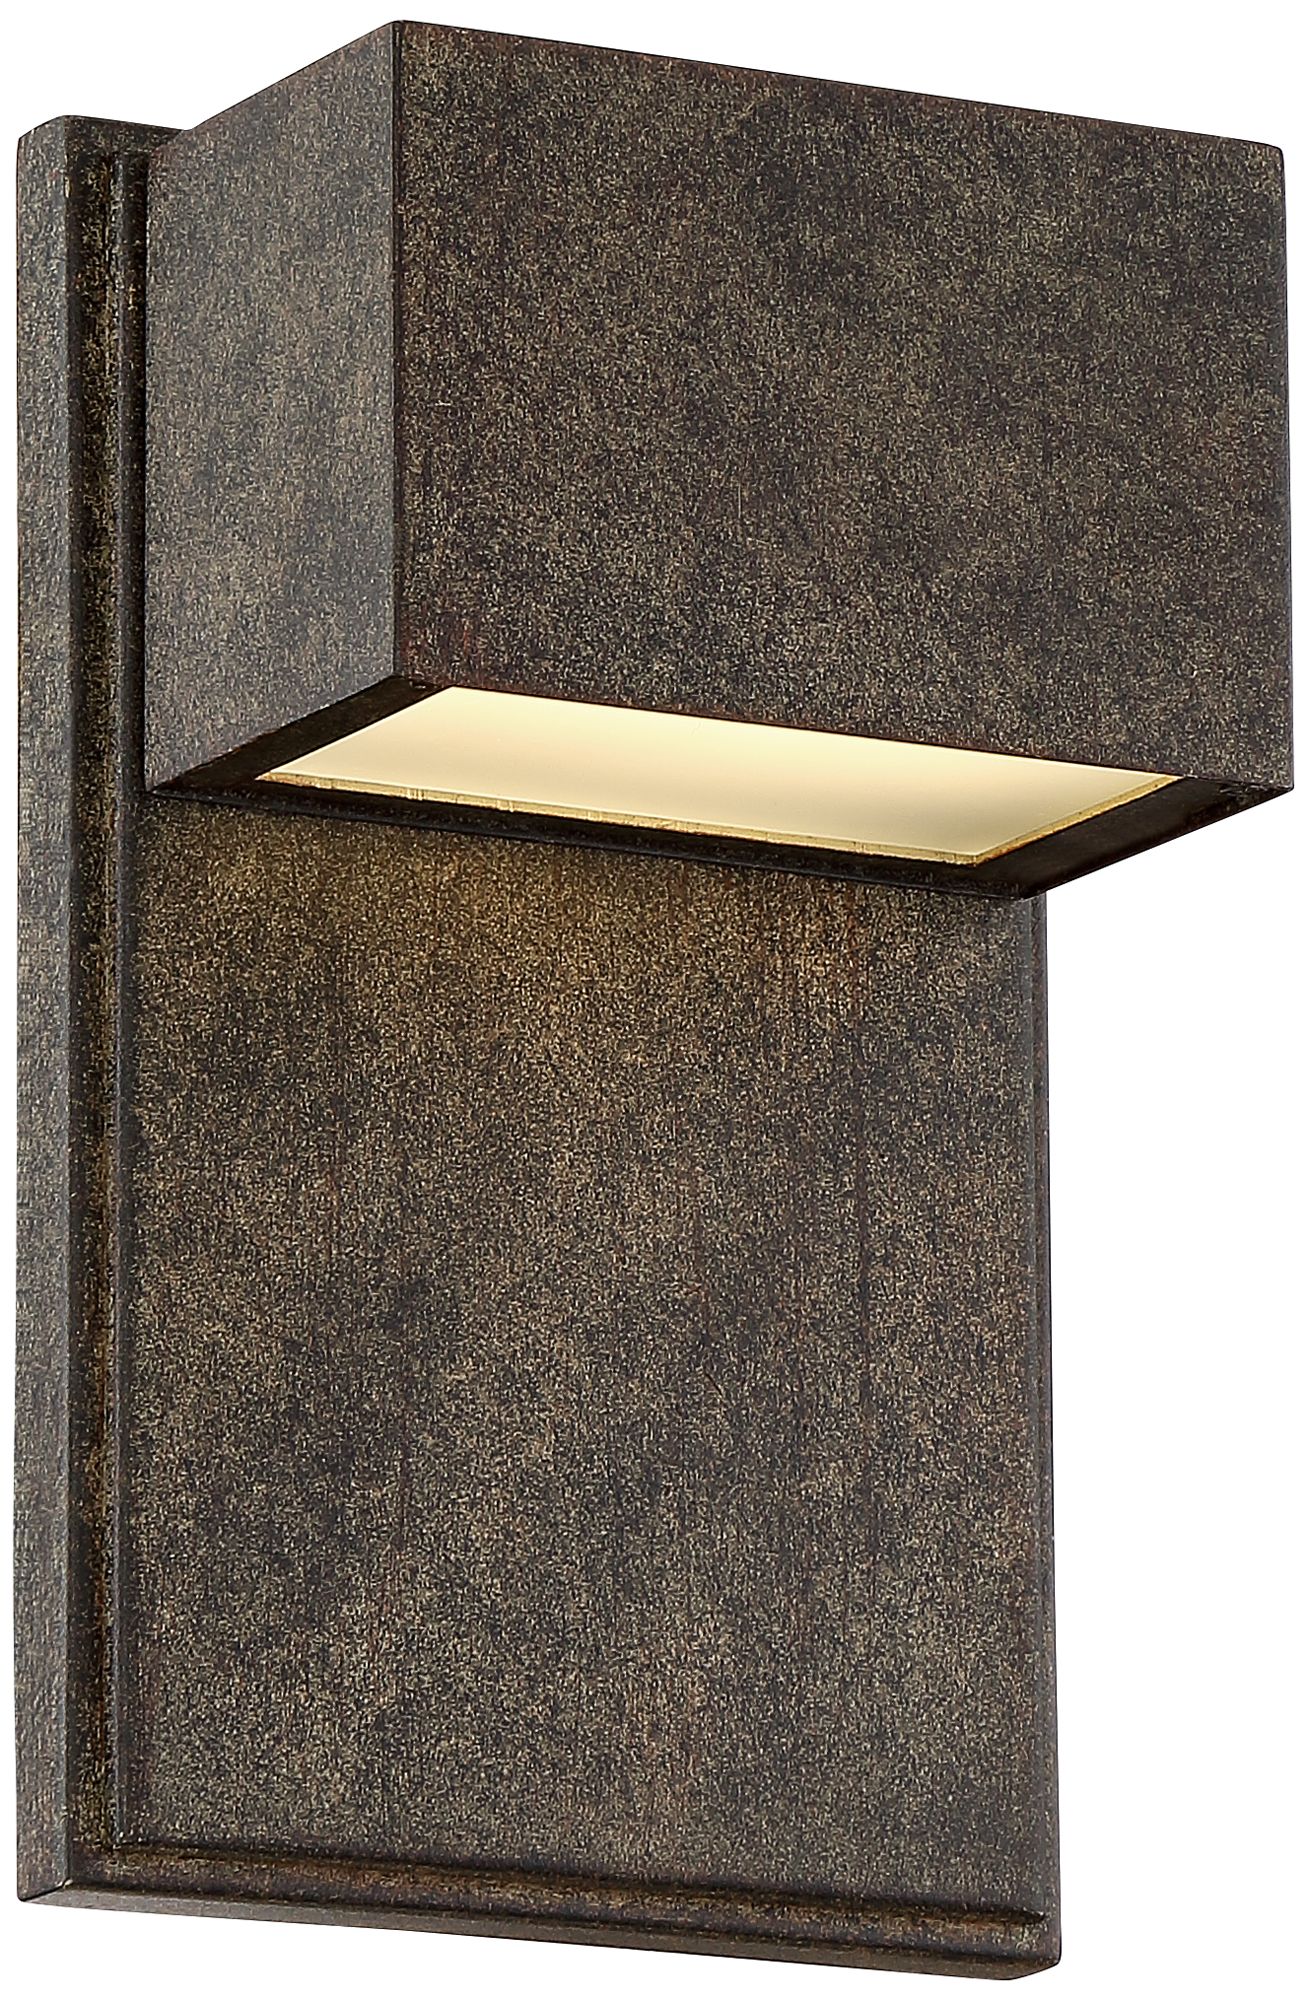 Possini Euro Design Modern Outdoor Wall Light Fixture LED Bronze Black Box 8" Frosted Lens Downlight for Exterior House Porch Patio - image 2 of 7